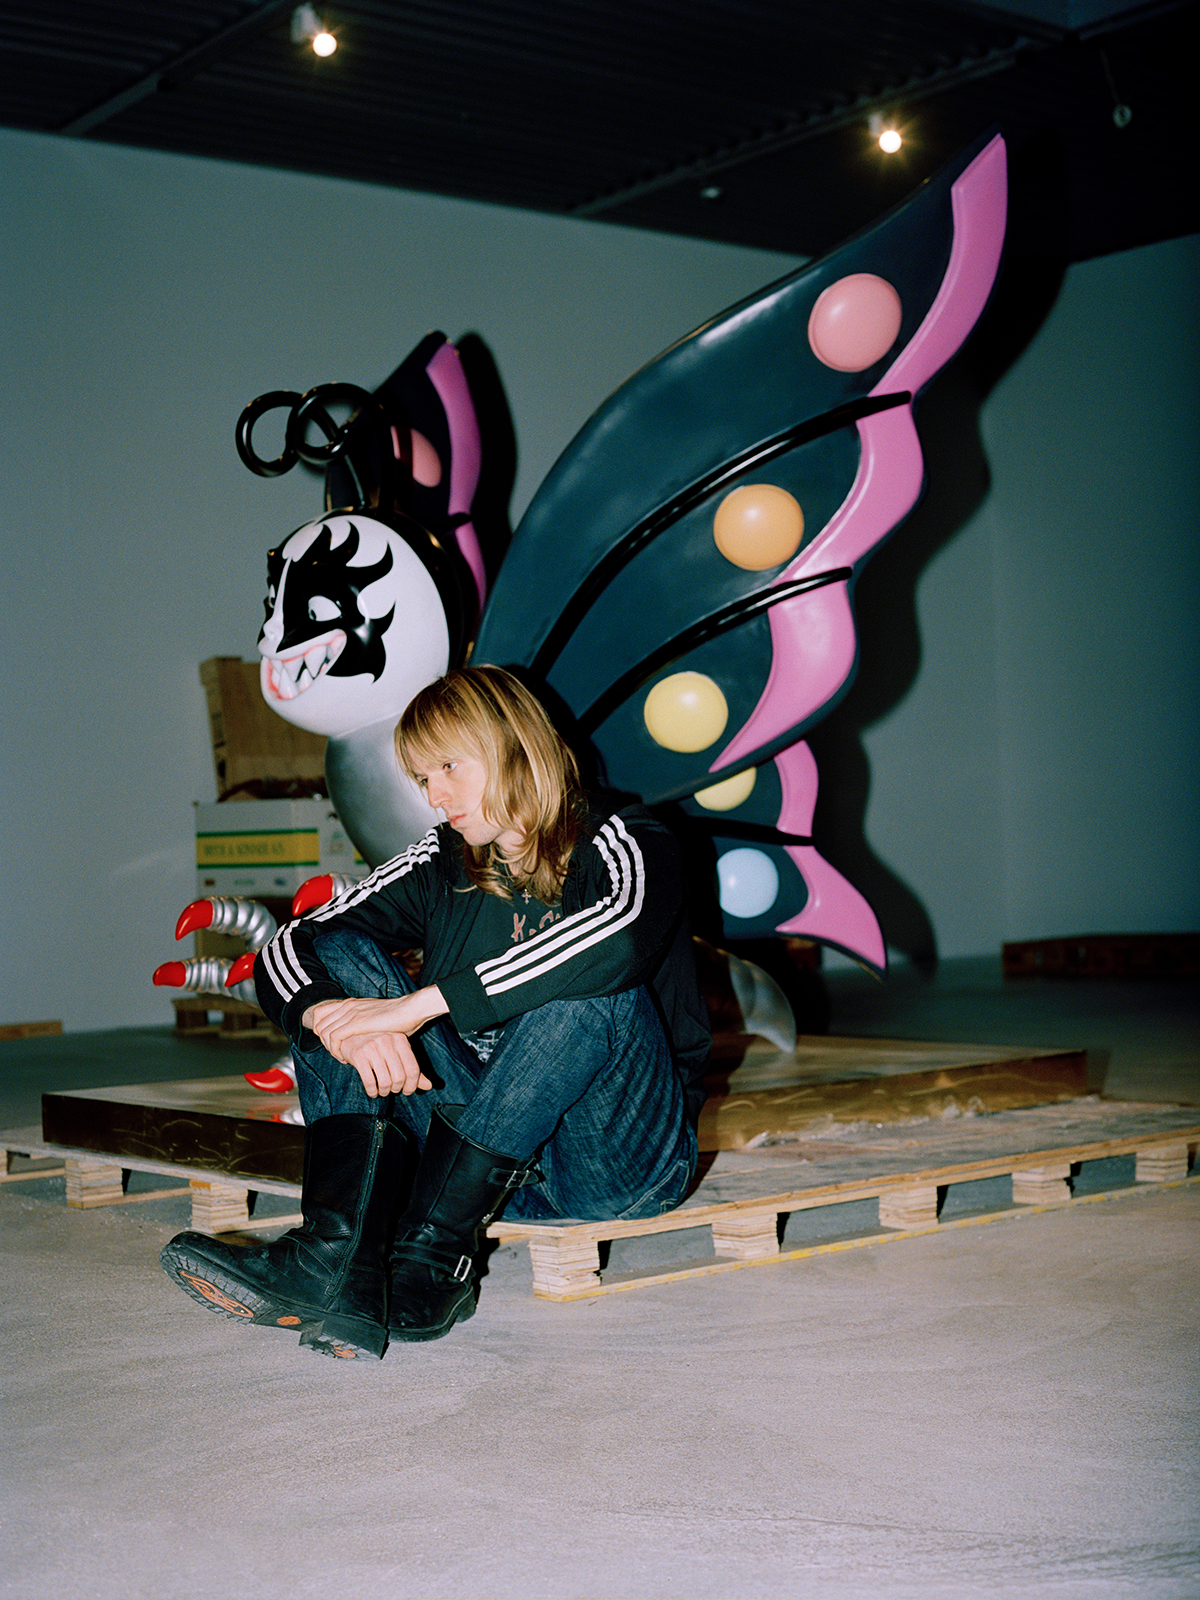 A person sitting on the floor wearing jeans and a black and white striped hoodie sitting next to a butterfly structure